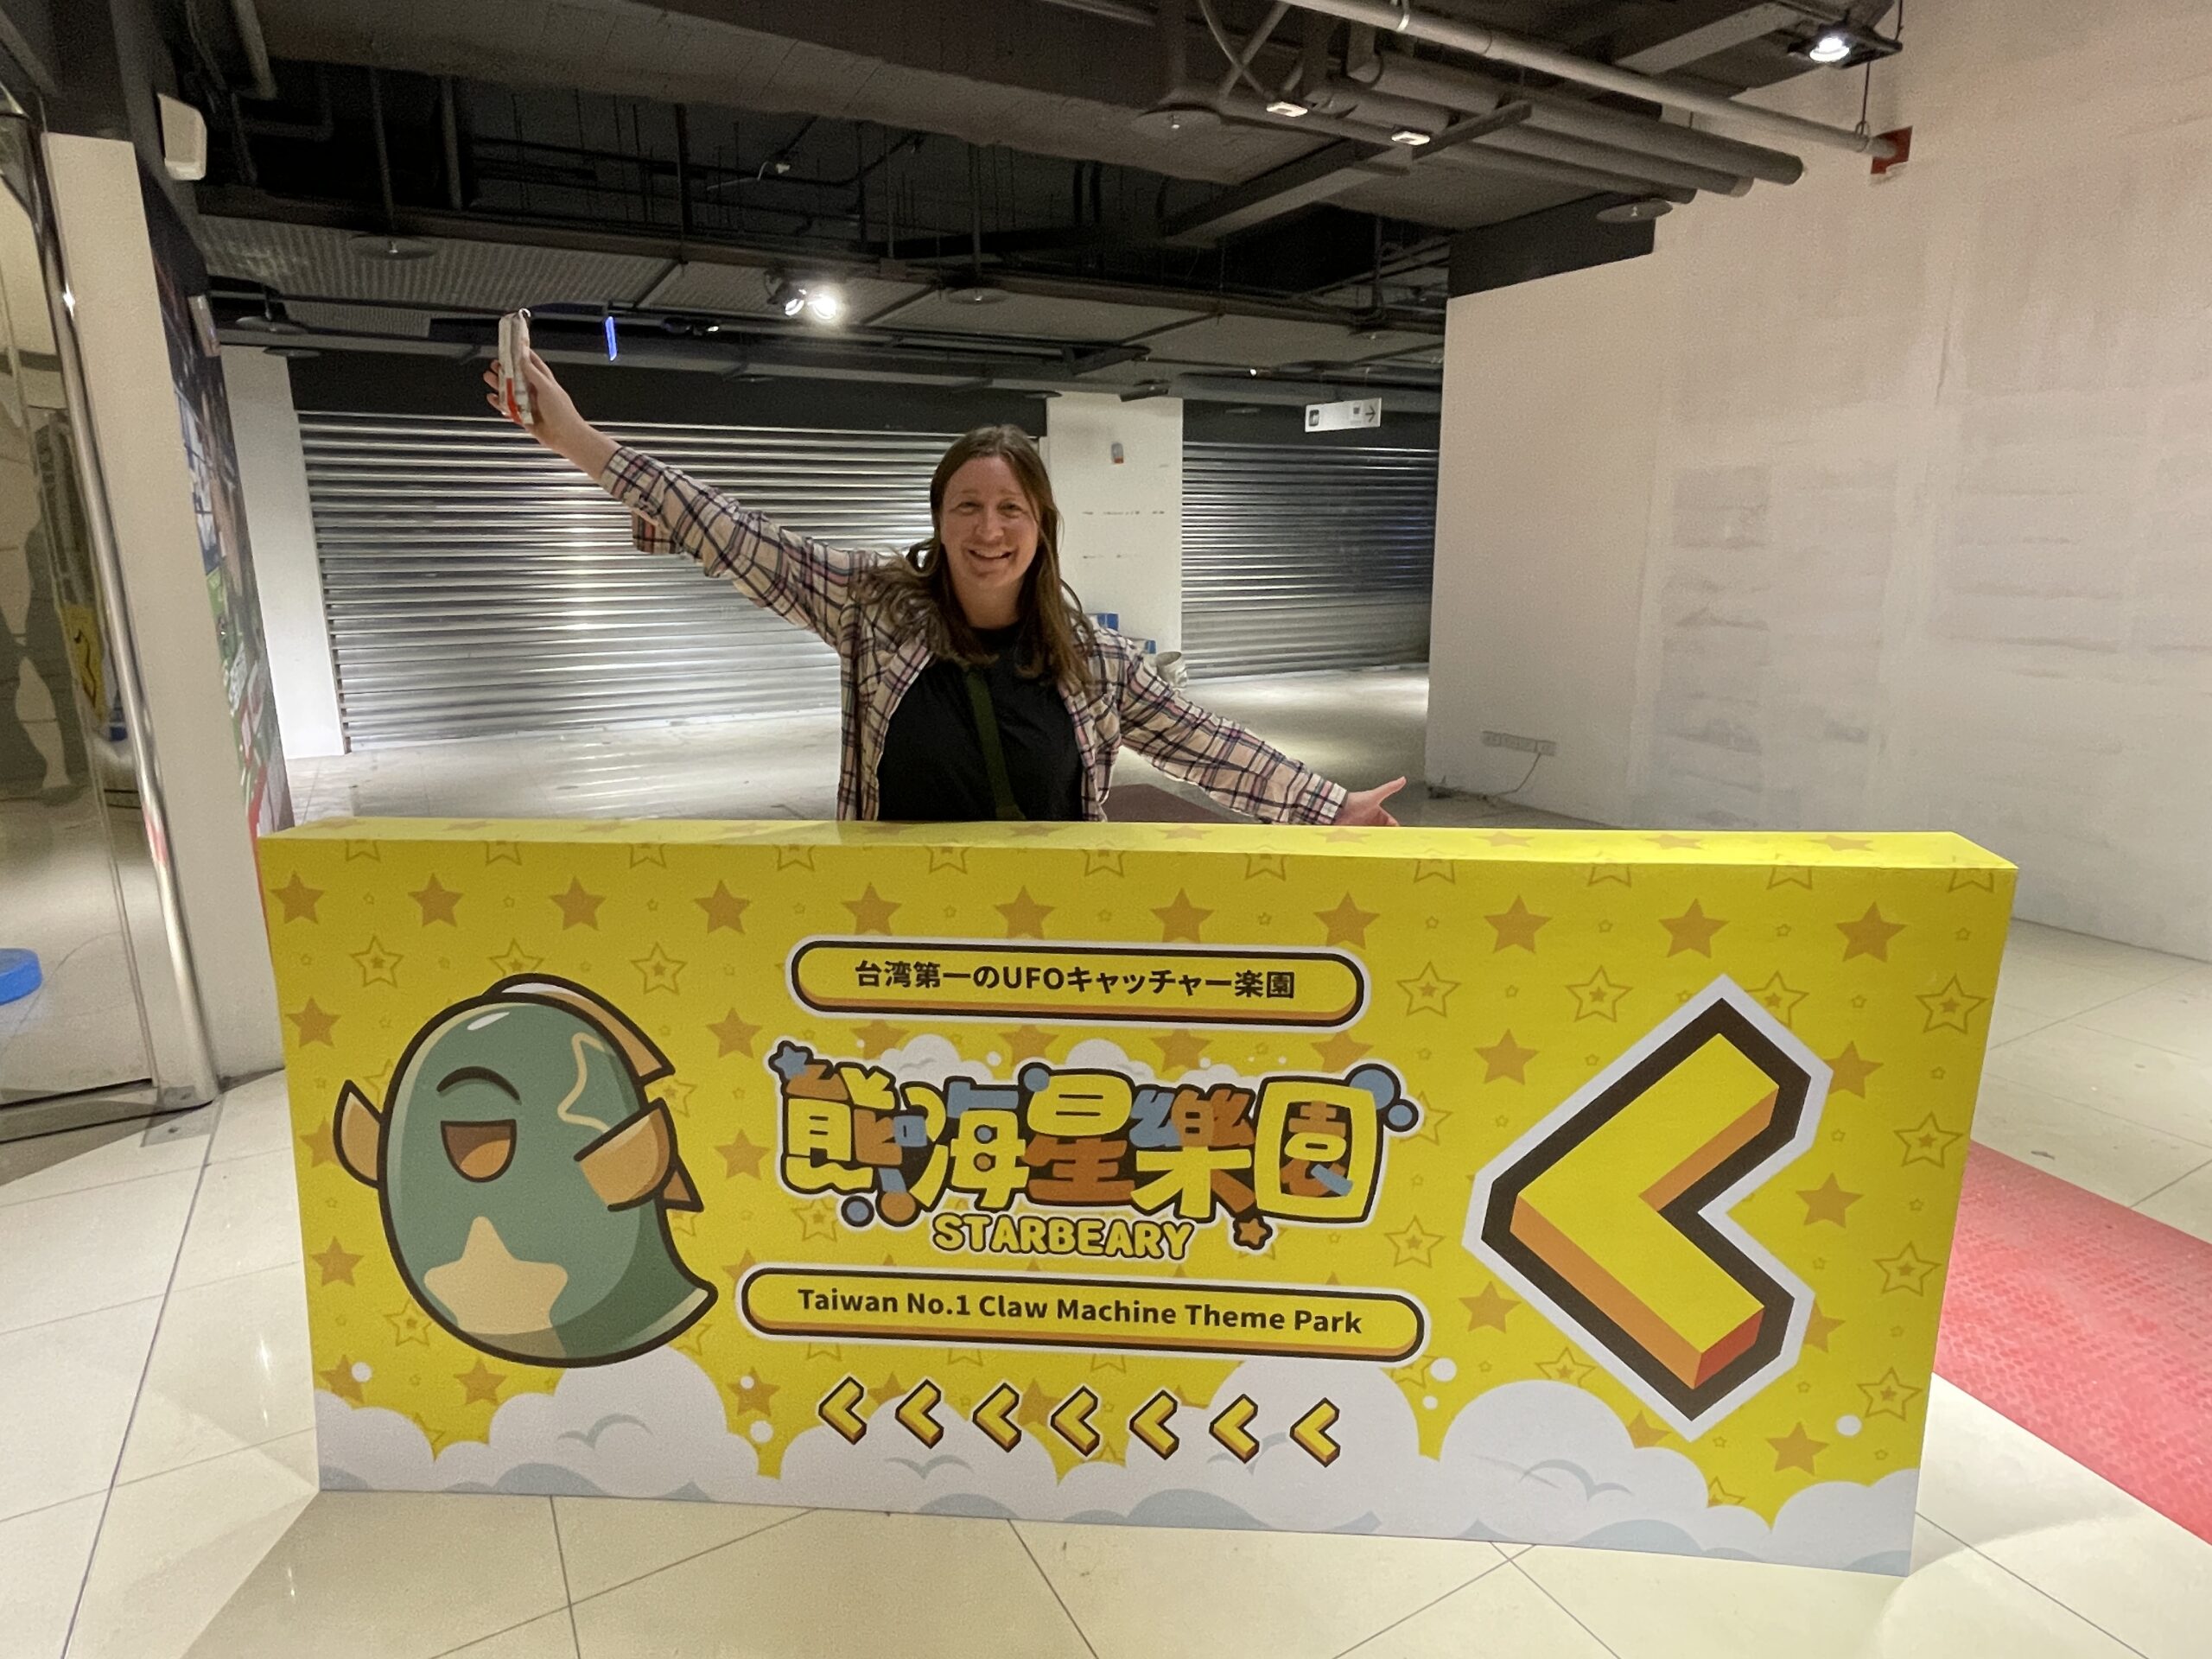 Back to Taipei: Claw Games, Karaoke, Photobooths and the Superbowl